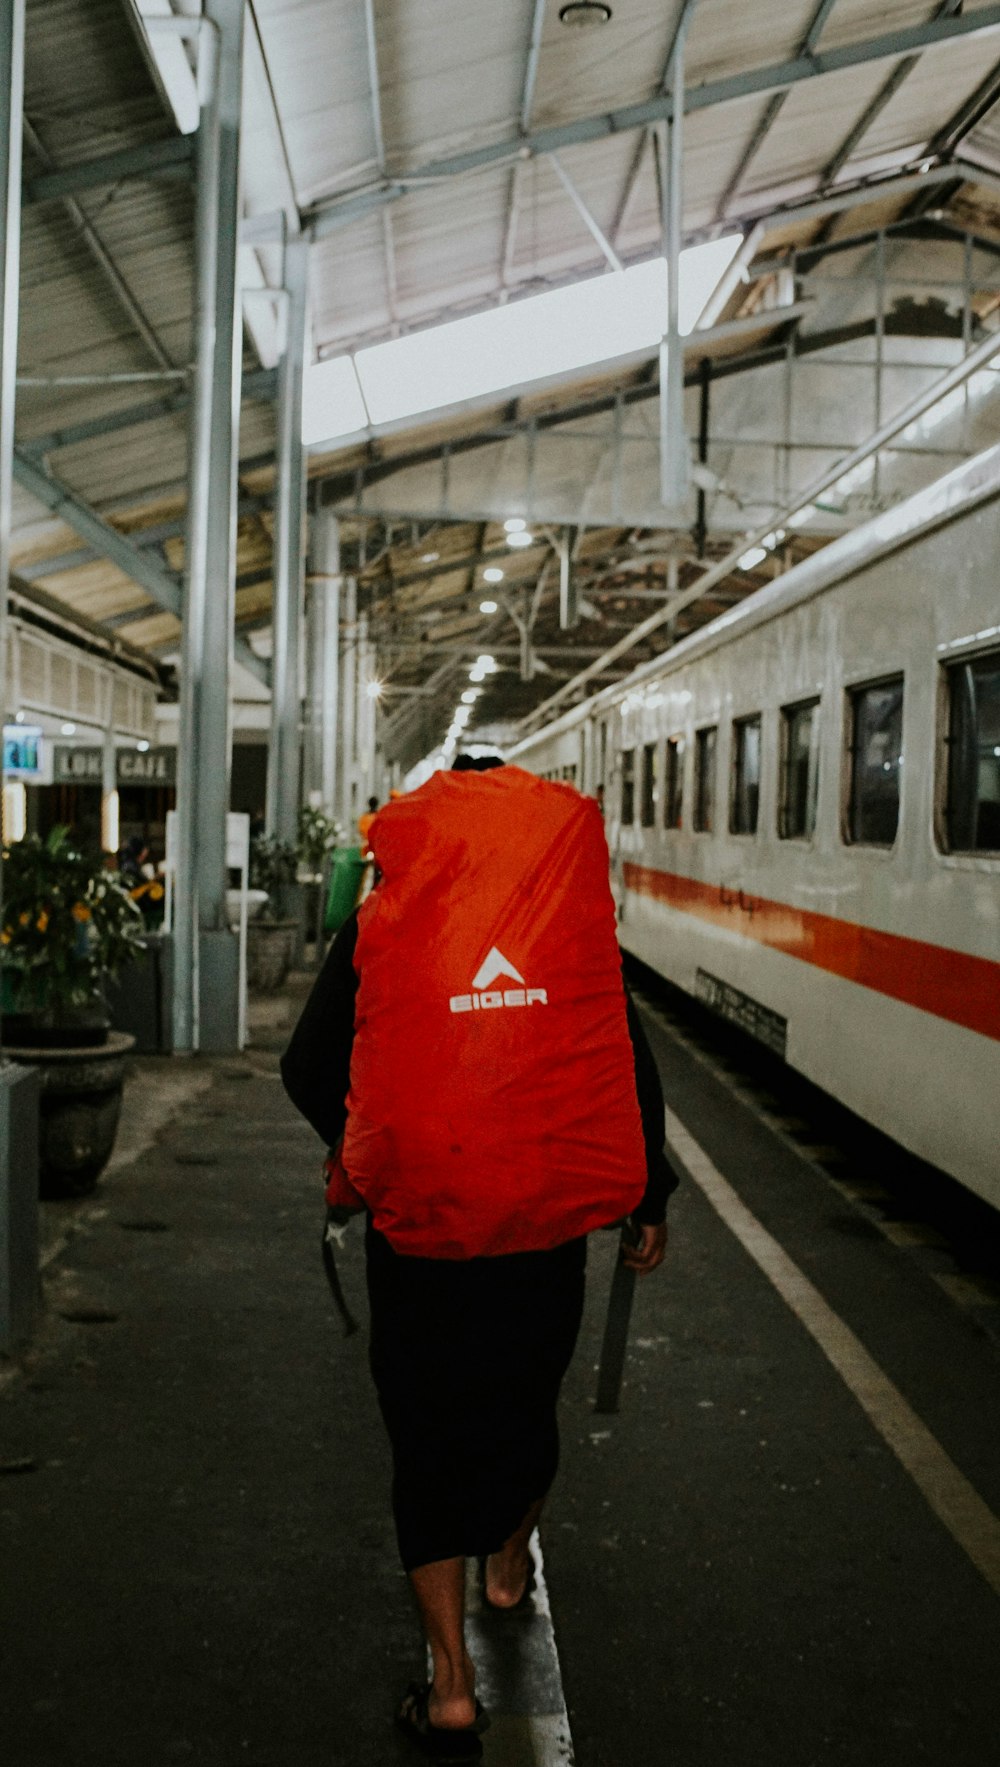 a person with a red jacket walking towards a train